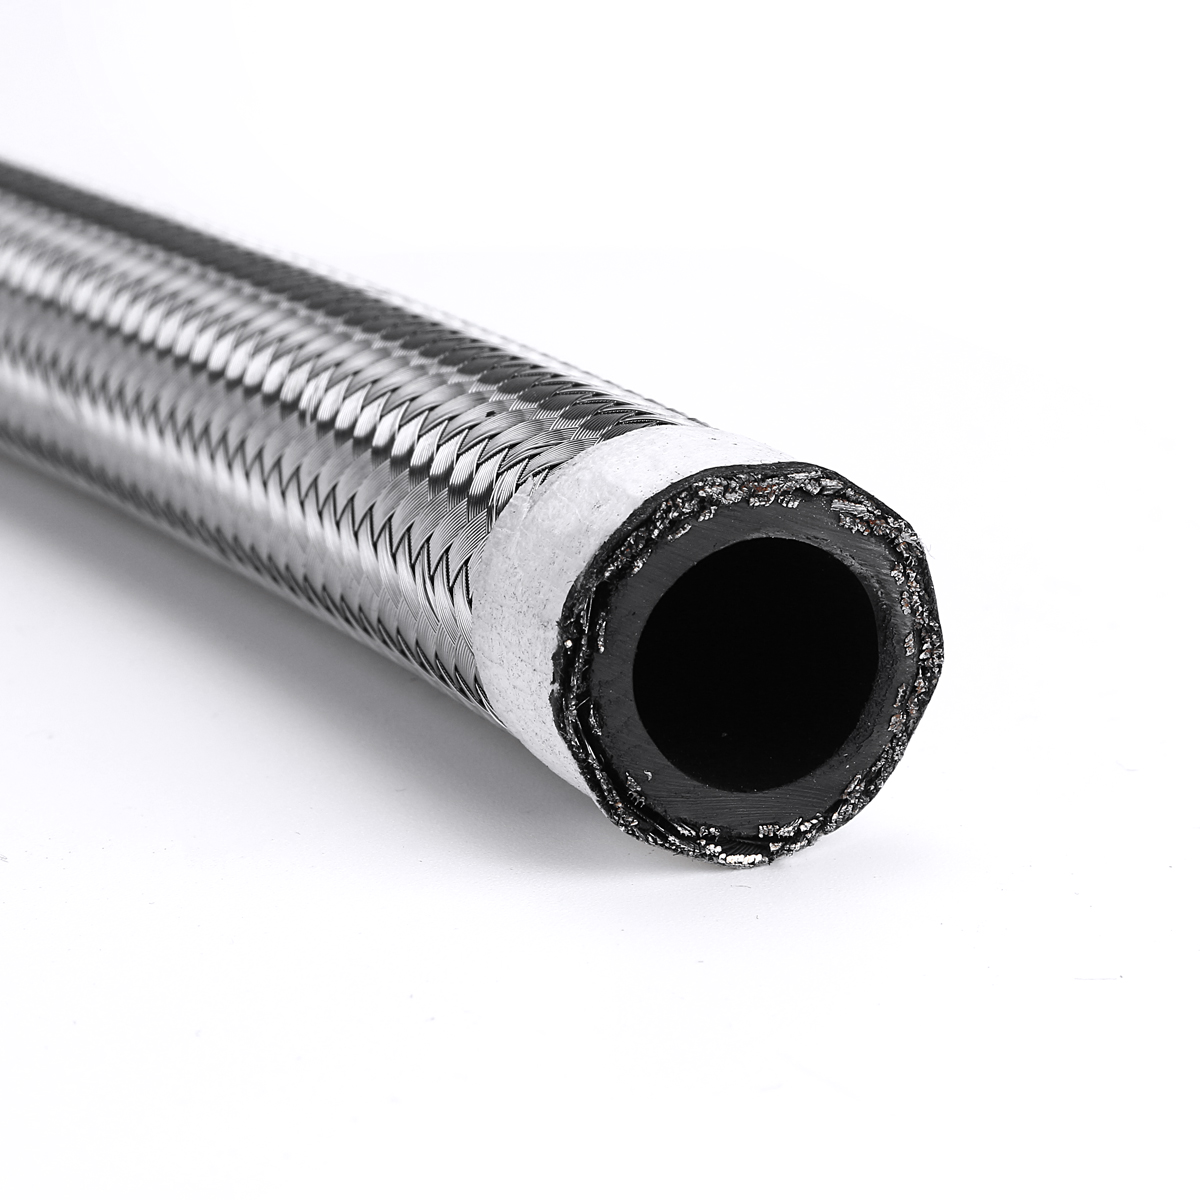 1FT-AN4-AN6-AN8-AN10-Fuel-Hose-Oil-Gas-Hose-Line-Pipe-Nylon-Stainless-Steel-Braided-Silver-1683291-7